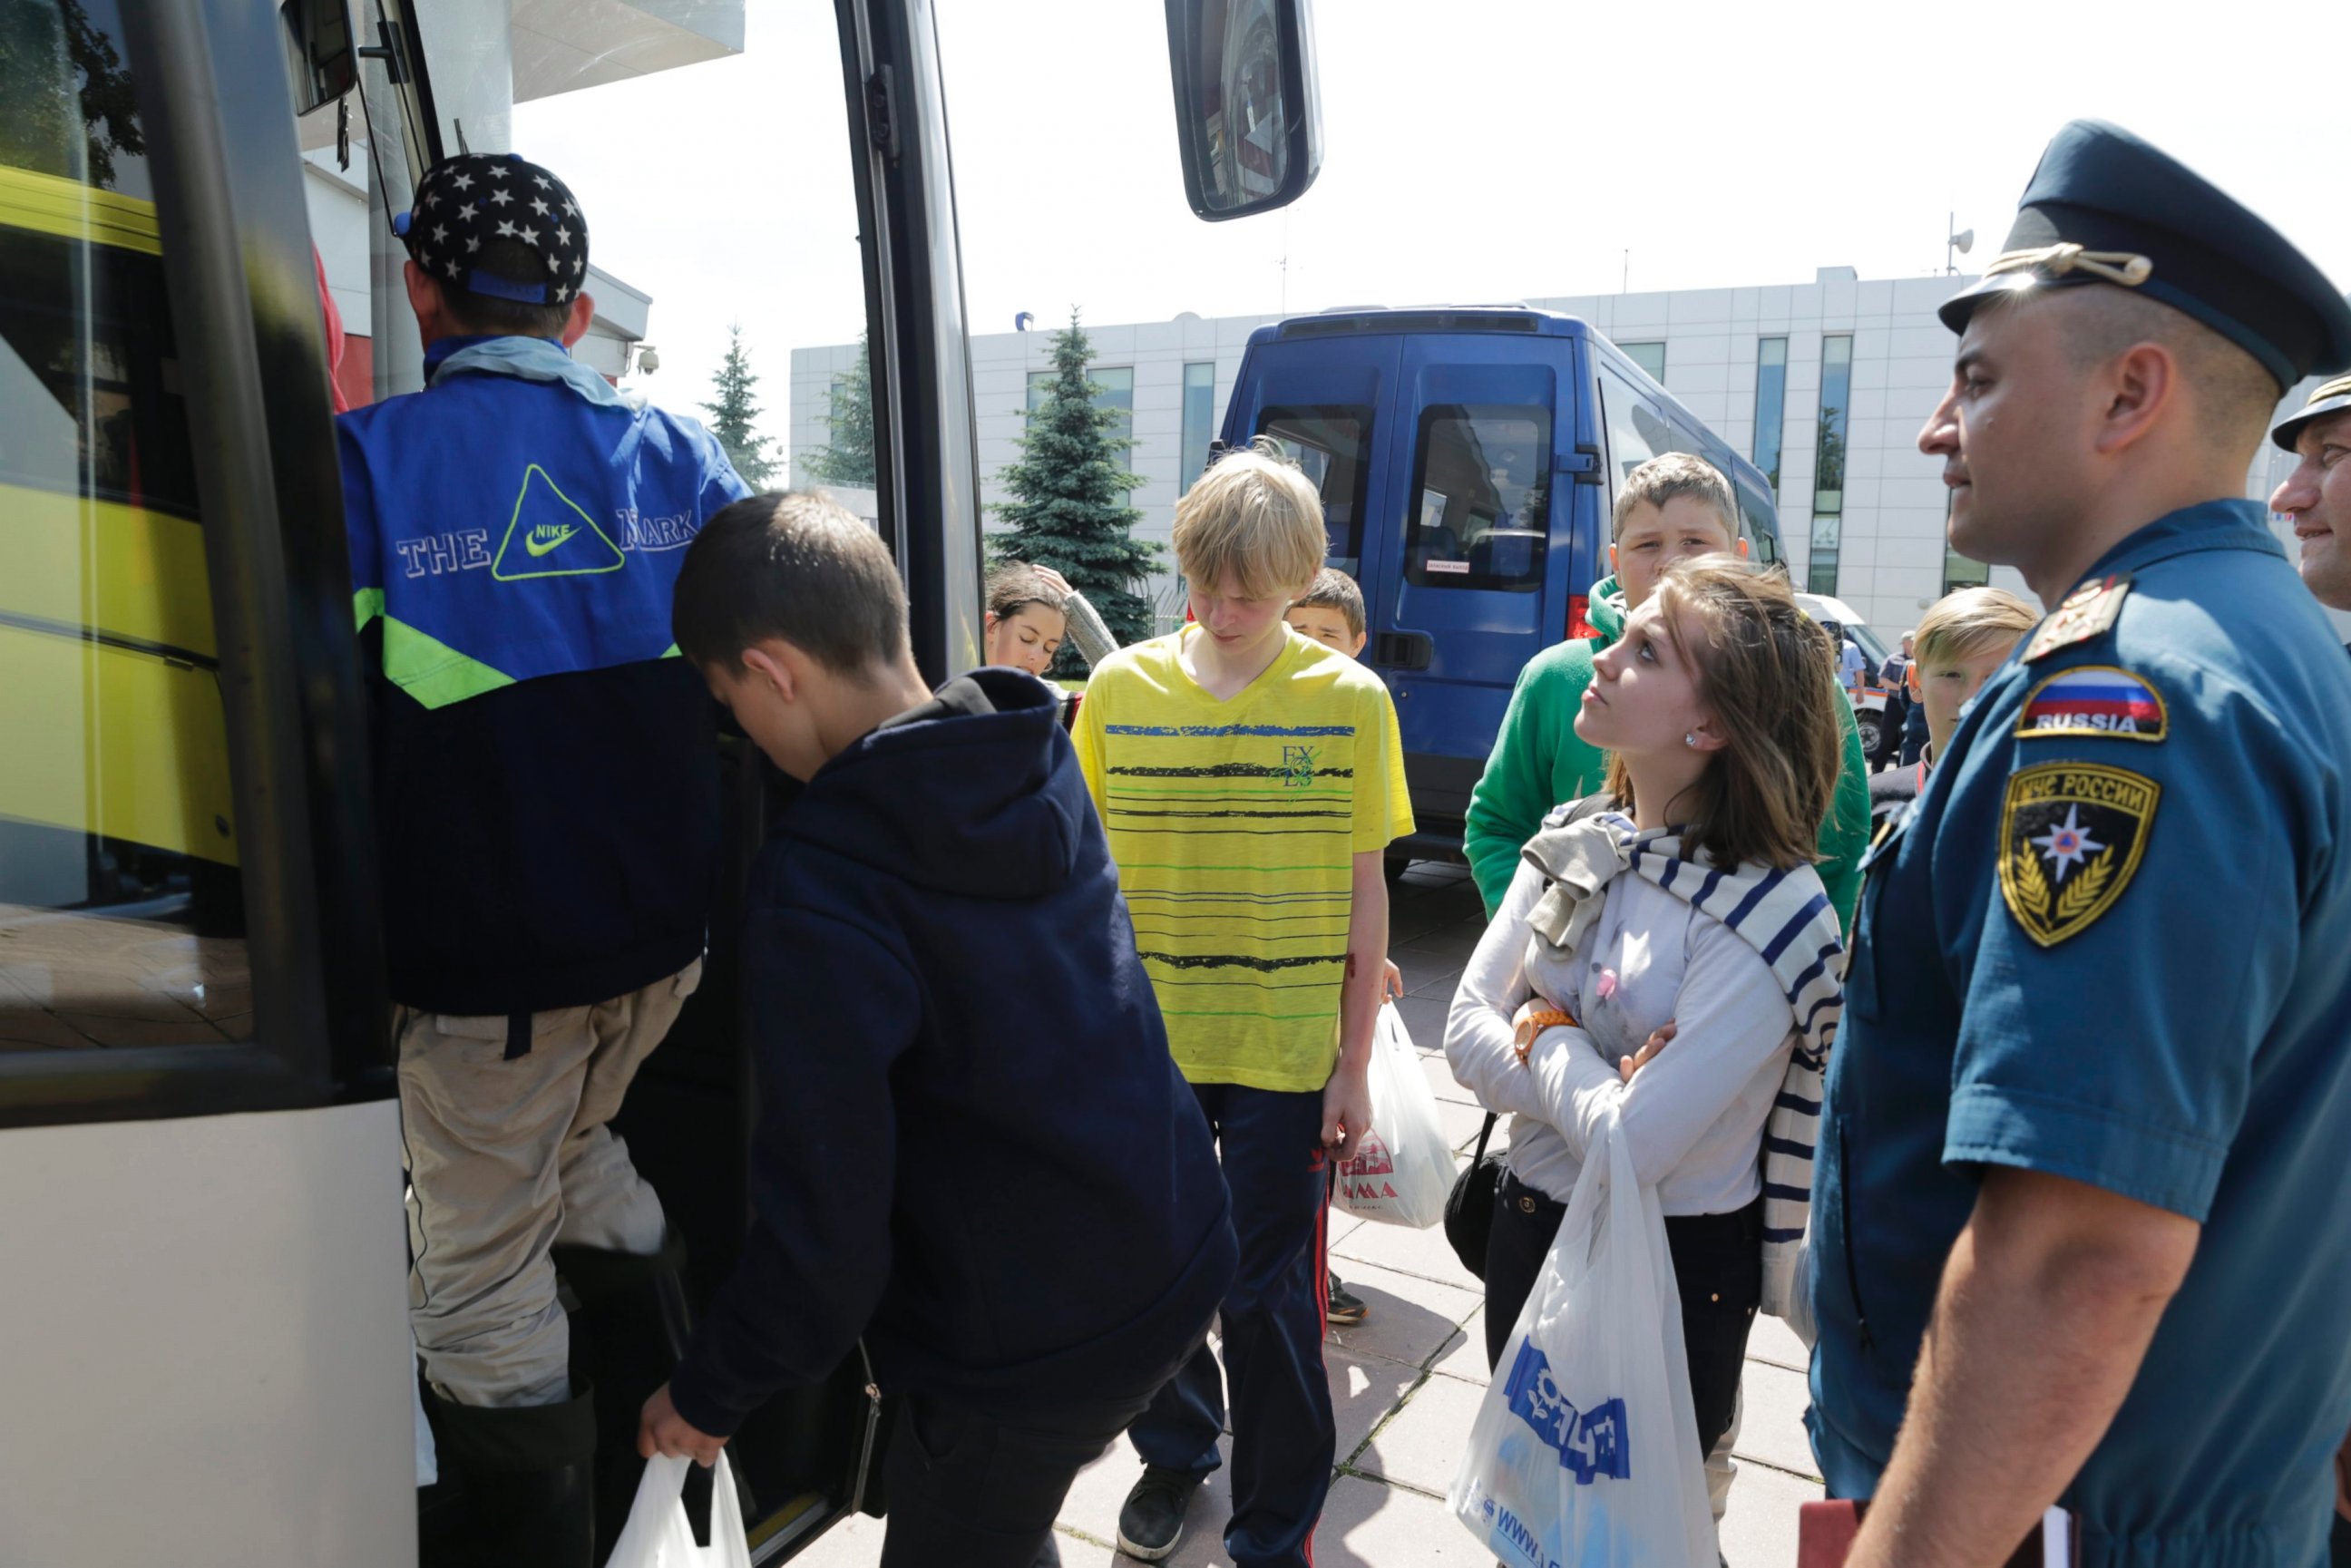 PHOTO: A picture released by the Russian Emergency Ministry shows Russian children embarking on a bus after arriving in Moscow, Russia, on June 20, 2016 from a tourist camp at the lake of Syamozero in the Republic of Karelia.